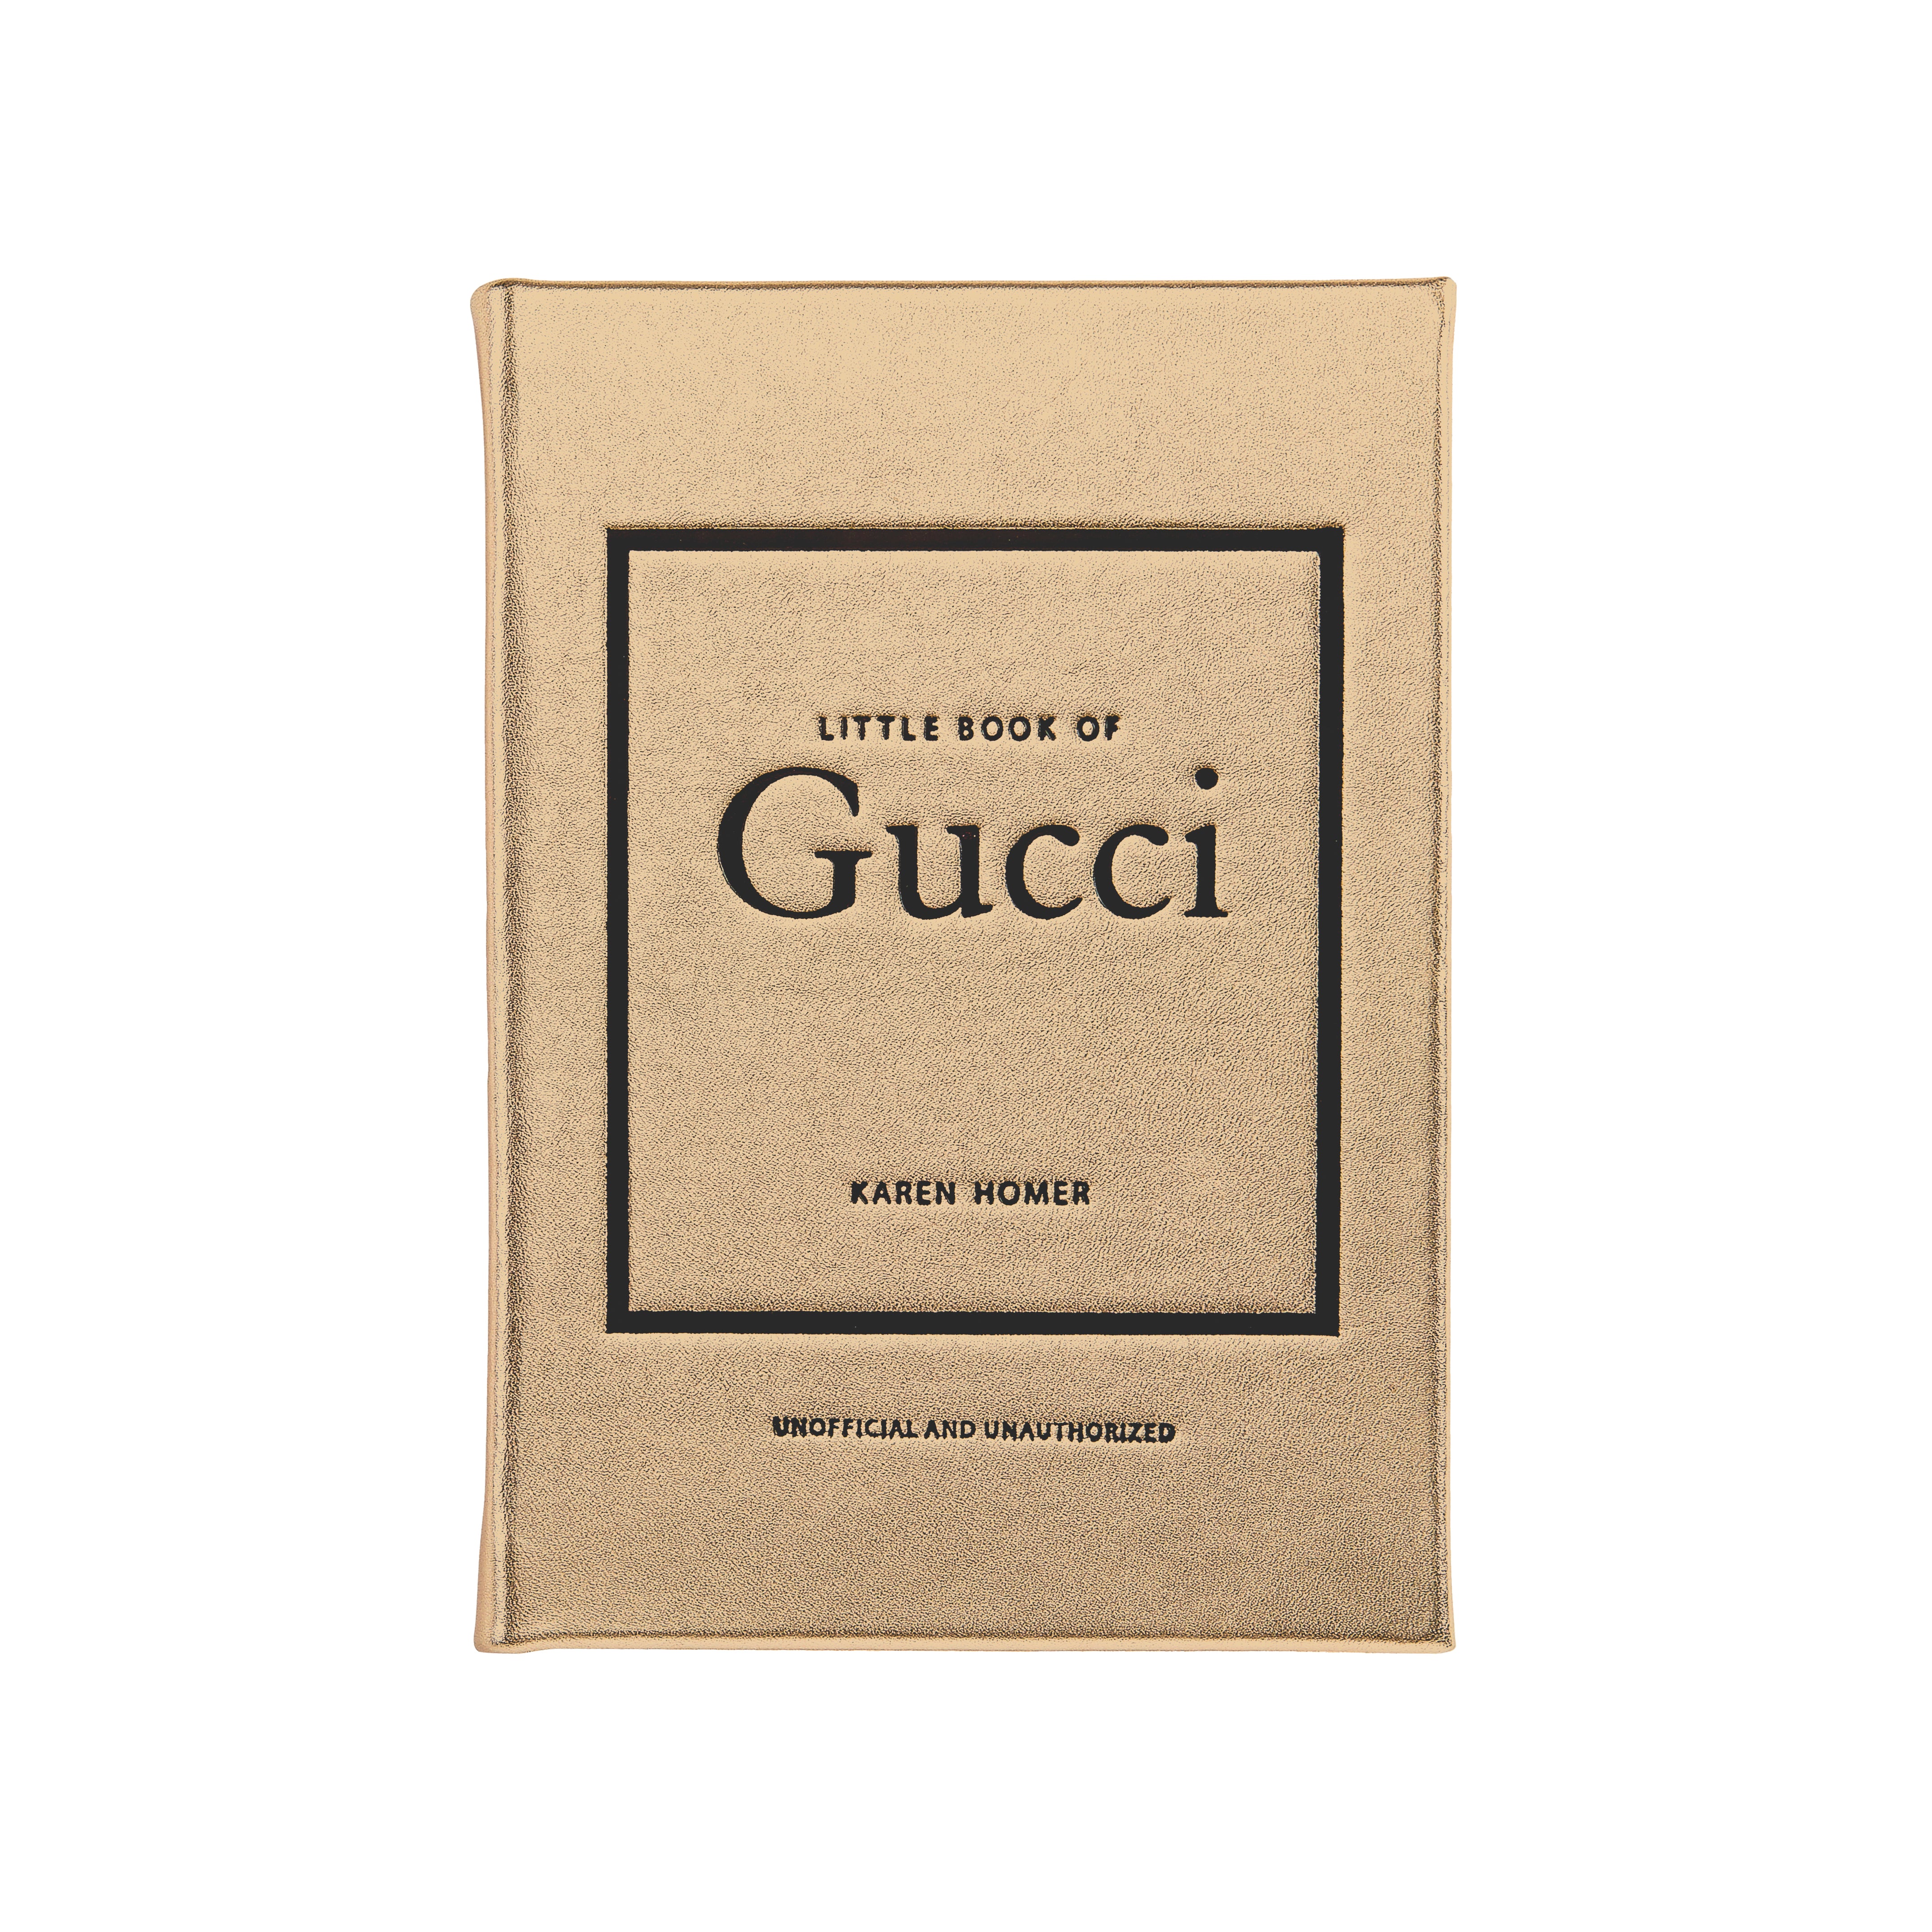 Little Book of Gucci: The Story of the Iconic Fashion House (Little Books  of Fashion, 7)